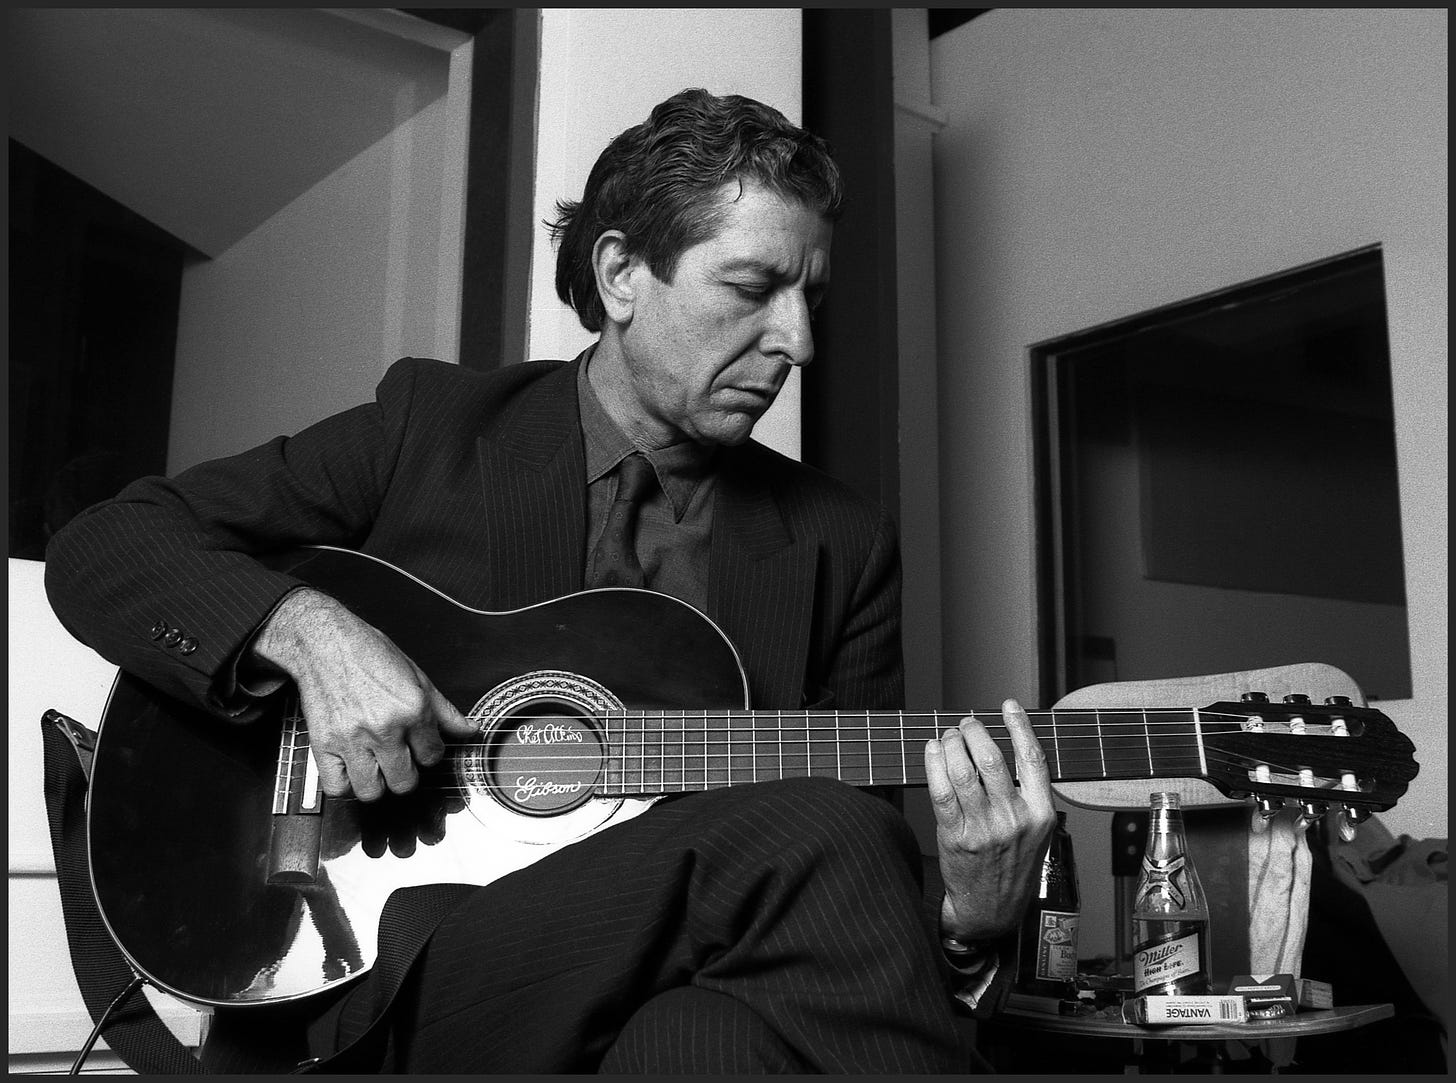 Leonard Cohen, Canadian poet and singer-songwriter, plays some of his songs in a small recording studio, lower Manhattan, New York, mid 1980s.